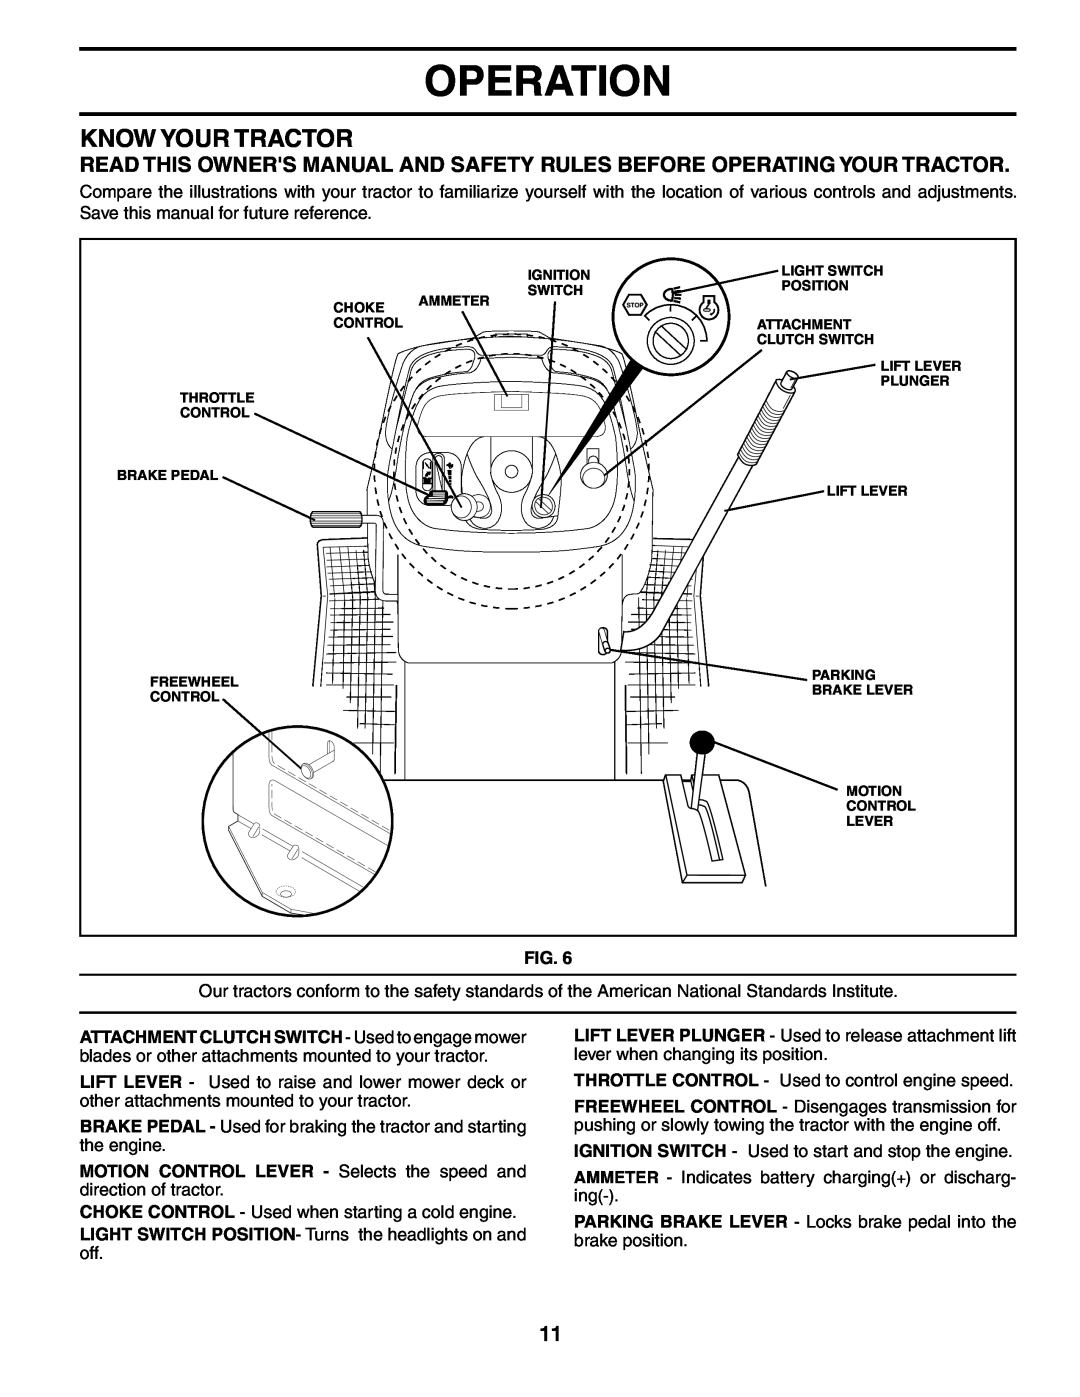 Poulan 184425, 954569455 Know Your Tractor, Operation, MOTION CONTROL LEVER - Selects the speed and direction of tractor 